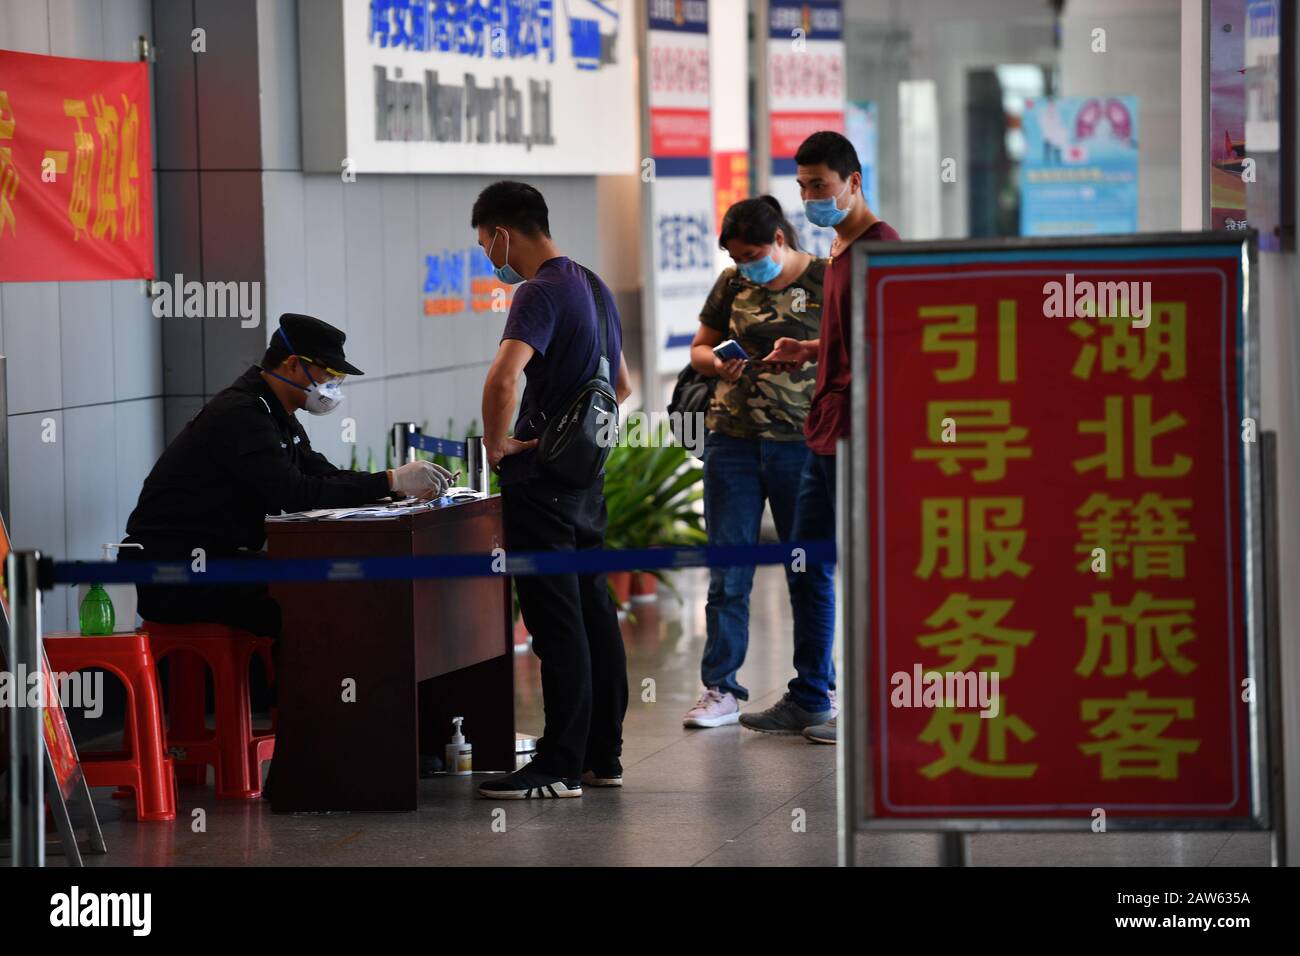 (200207) -- HAIKOU, Feb. 7, 2020 (Xinhua) -- A staff member from Haikou of south China's Hainan Province records information of passengers in Xuwen County of Zhanjiang City, south China's Guangdong Province, Feb. 6, 2020. Qiongzhou Strait is a major passage into and out of Hainan Island. Since the start of the prevention and control of pneumonia caused by the novel coronavirus, Hainan and Guangdong have both moved the prevention and control threshold forward. Hainan has sent more than 160 joint anti-epidemic personnel from multiple departments to Zhanjiang of Guangdong Province, and set up fou Stock Photo